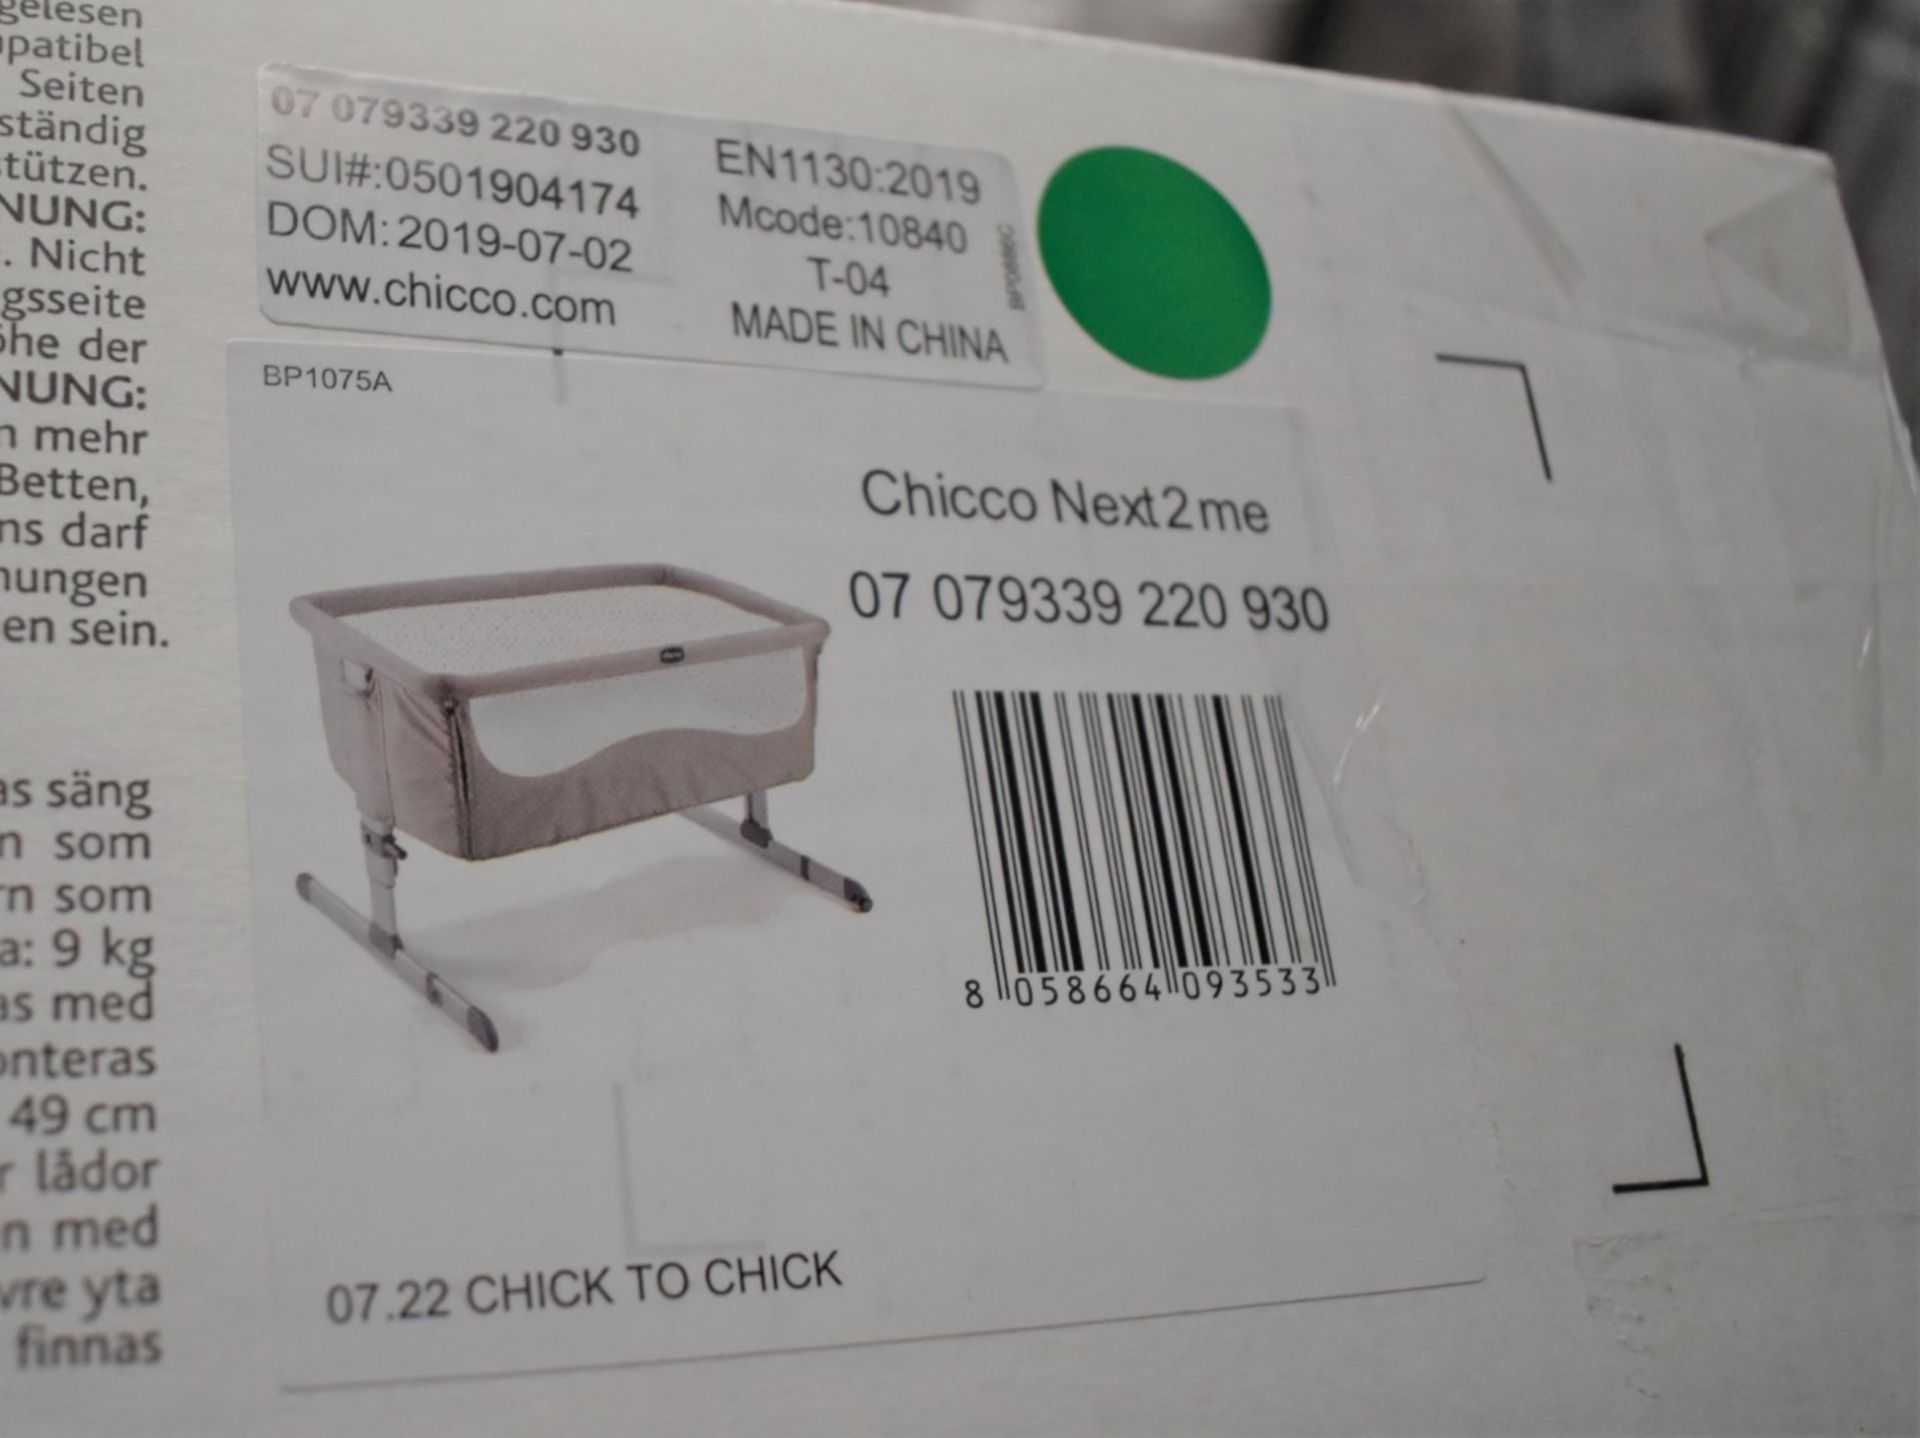 1 x Chicco Next2me Chick to Chick Bedside Baby Crib - Brand New 2019 Sealed Stock - Includes - Image 4 of 5